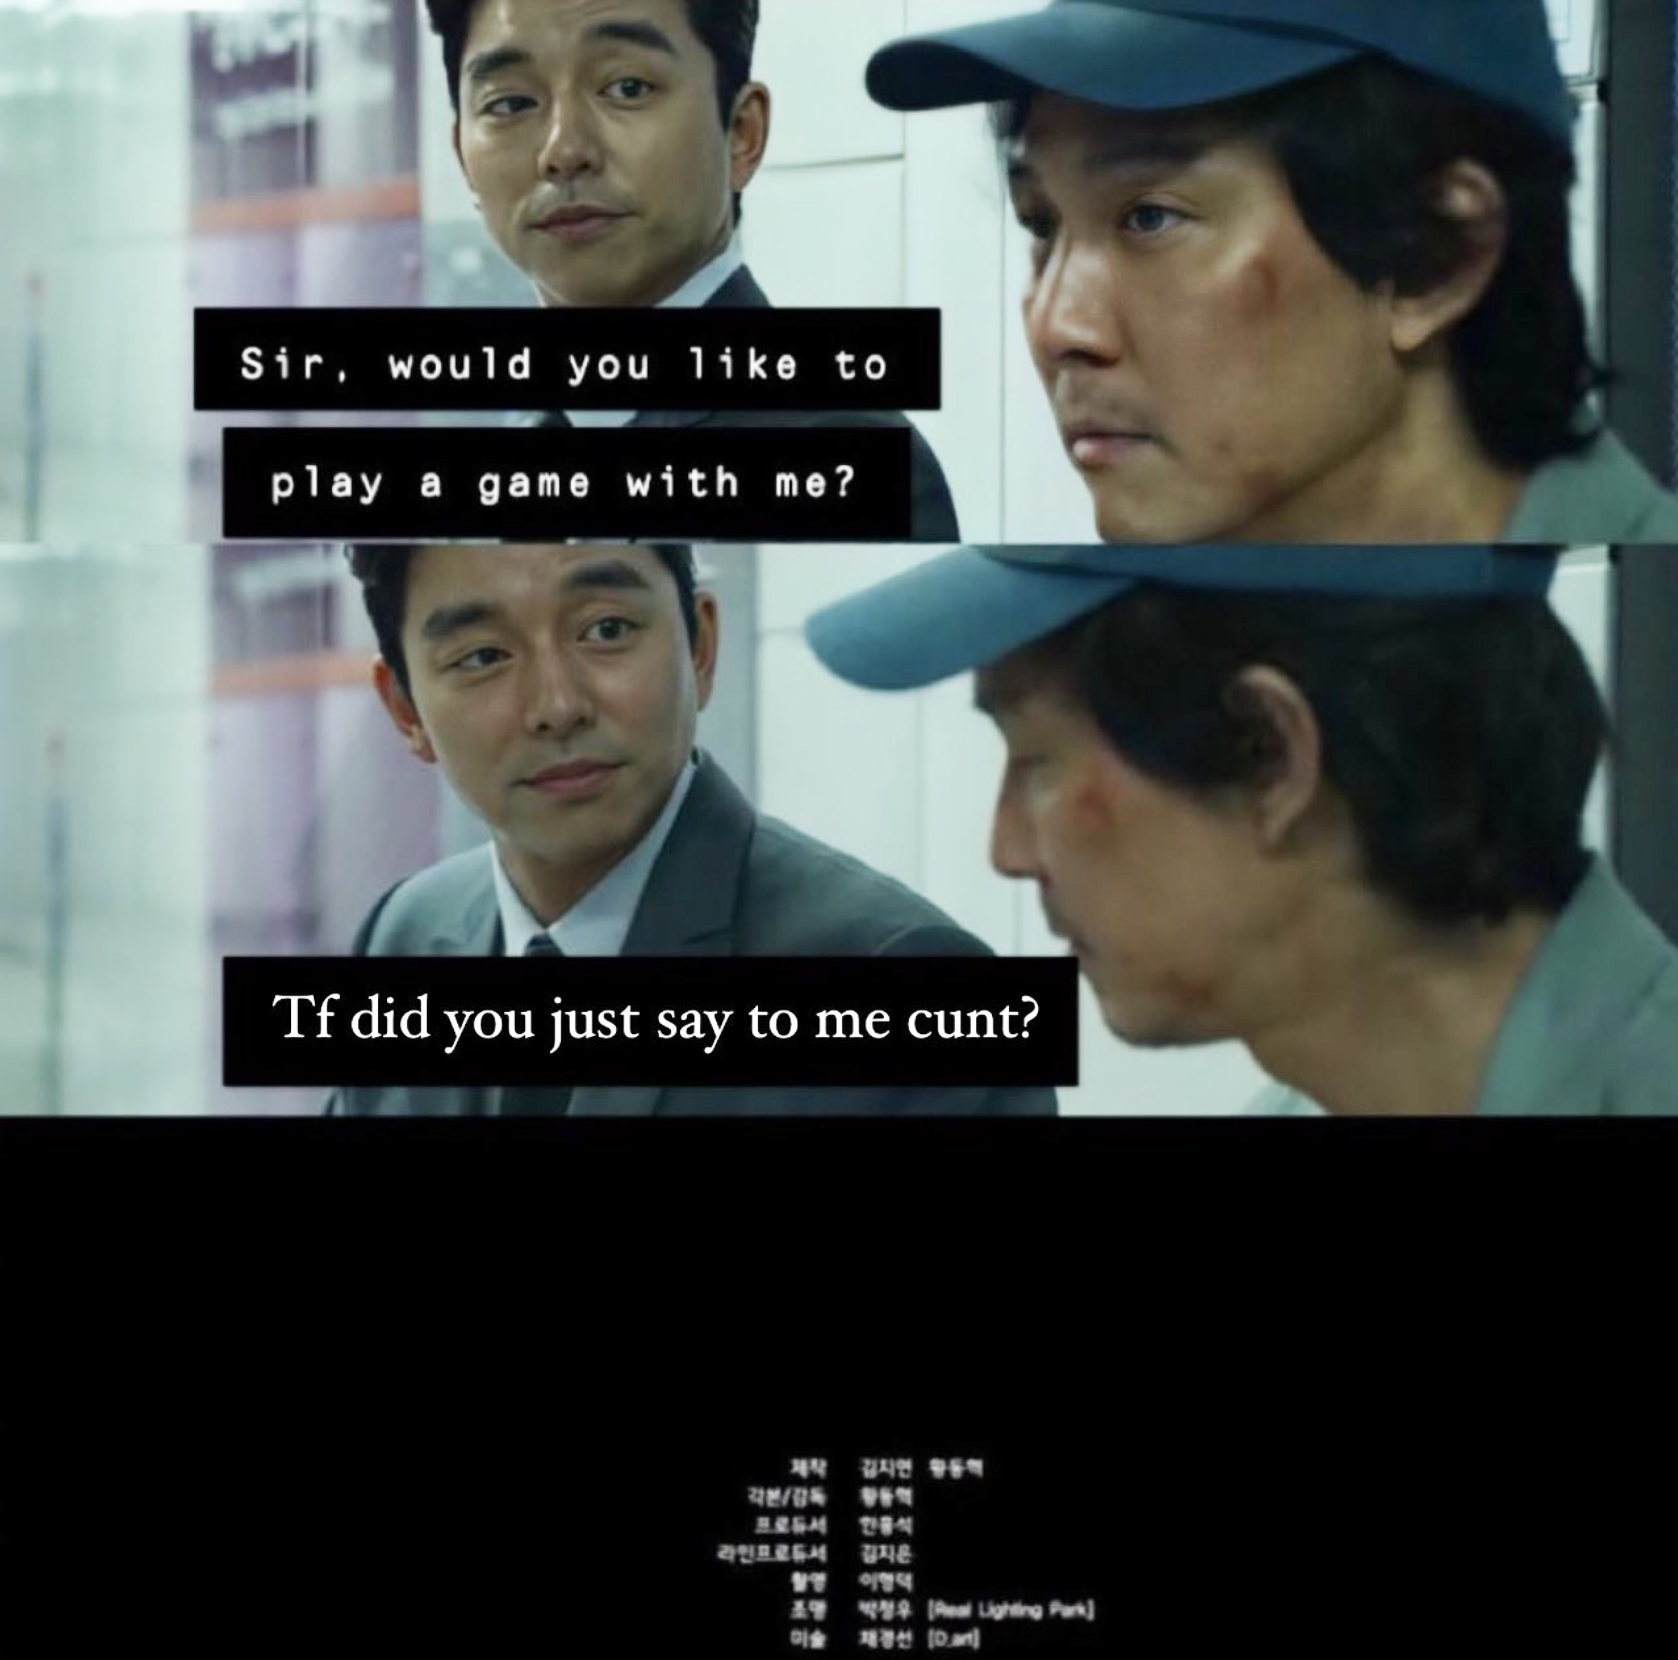 The Squid Game salesman and Gi-hun talking; the salesman is asking if Gi-hun would like to play a game and Gi-hun responds by saying &quot;The fuck did you just say to me cunt?&quot;